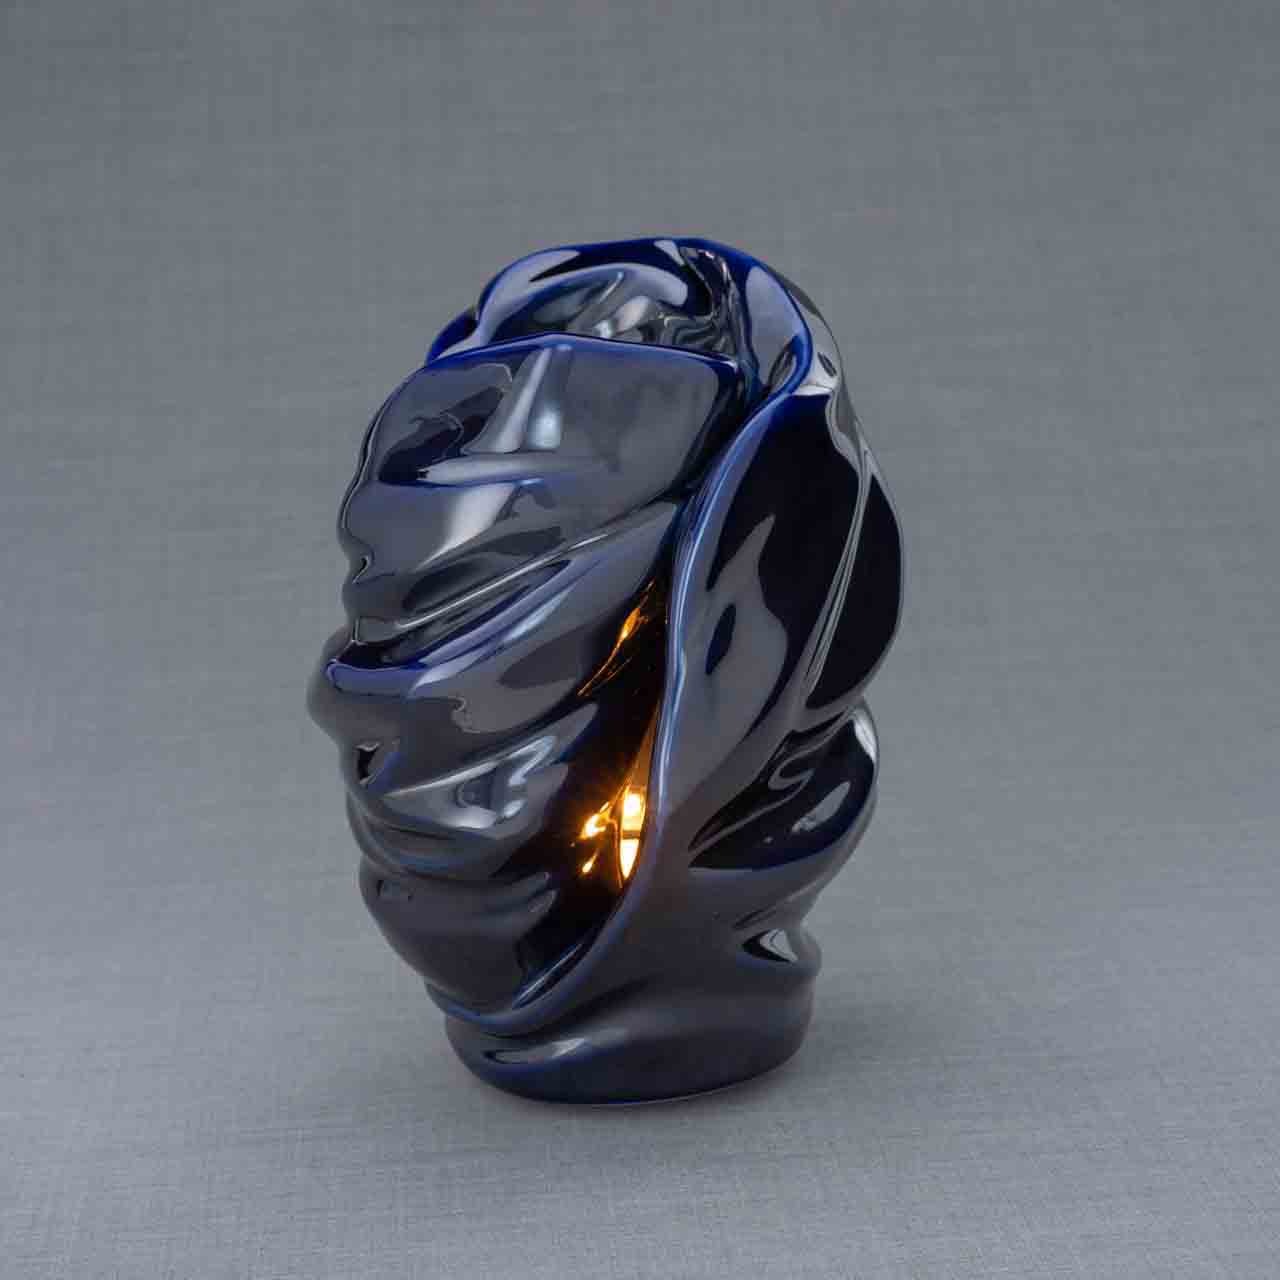 Light Adult Cremation Urn for Ashes in Metallic Blue